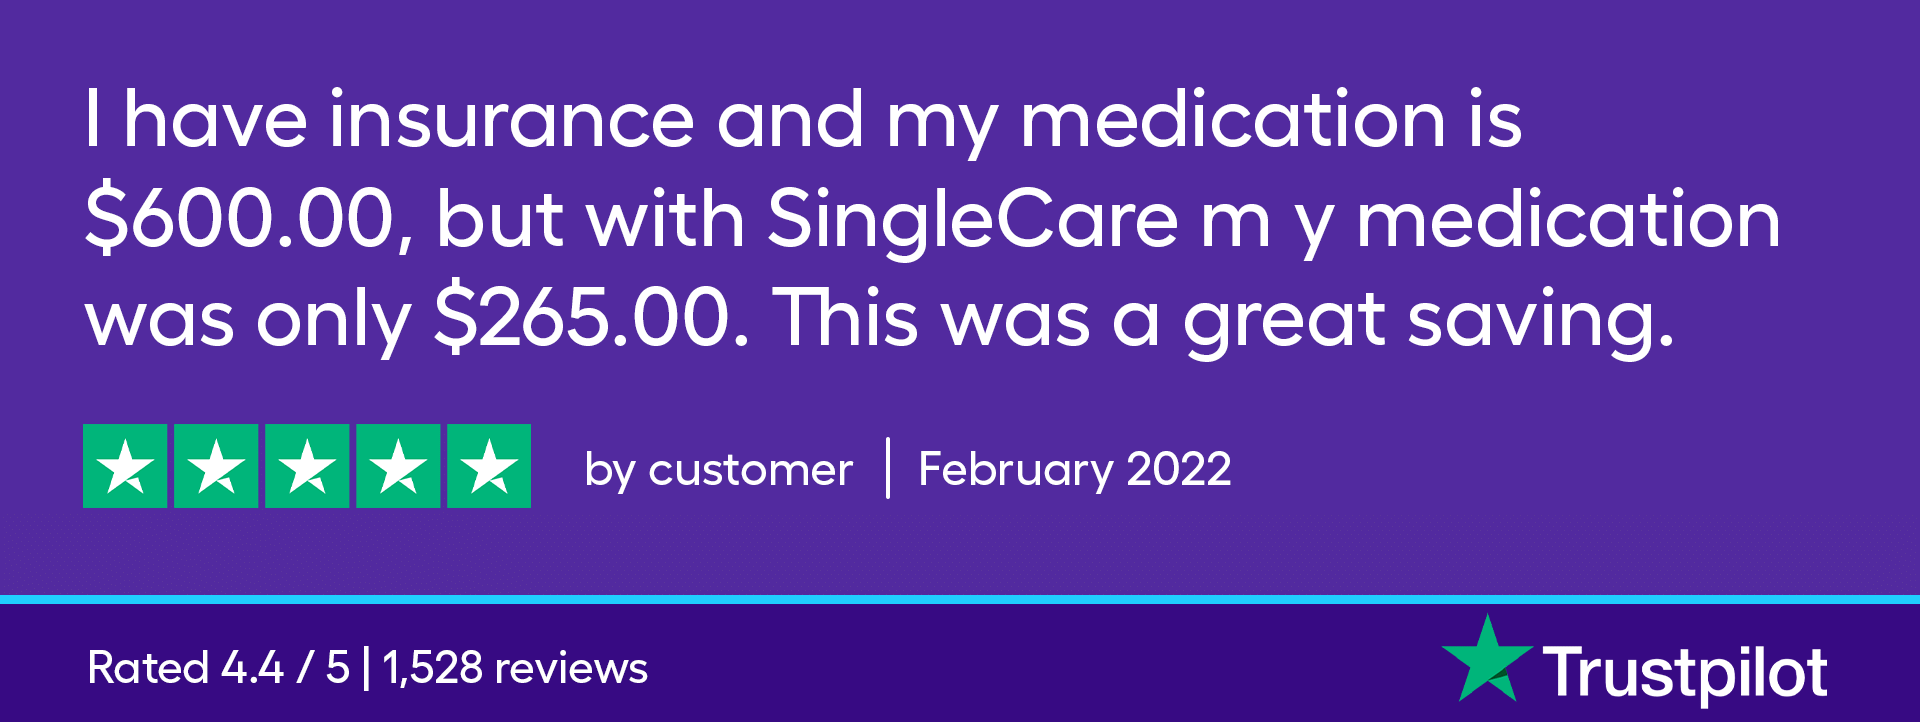 I have insurance and my medication is $600 but with SingleCare my medication was only $265. This was a great saving. 